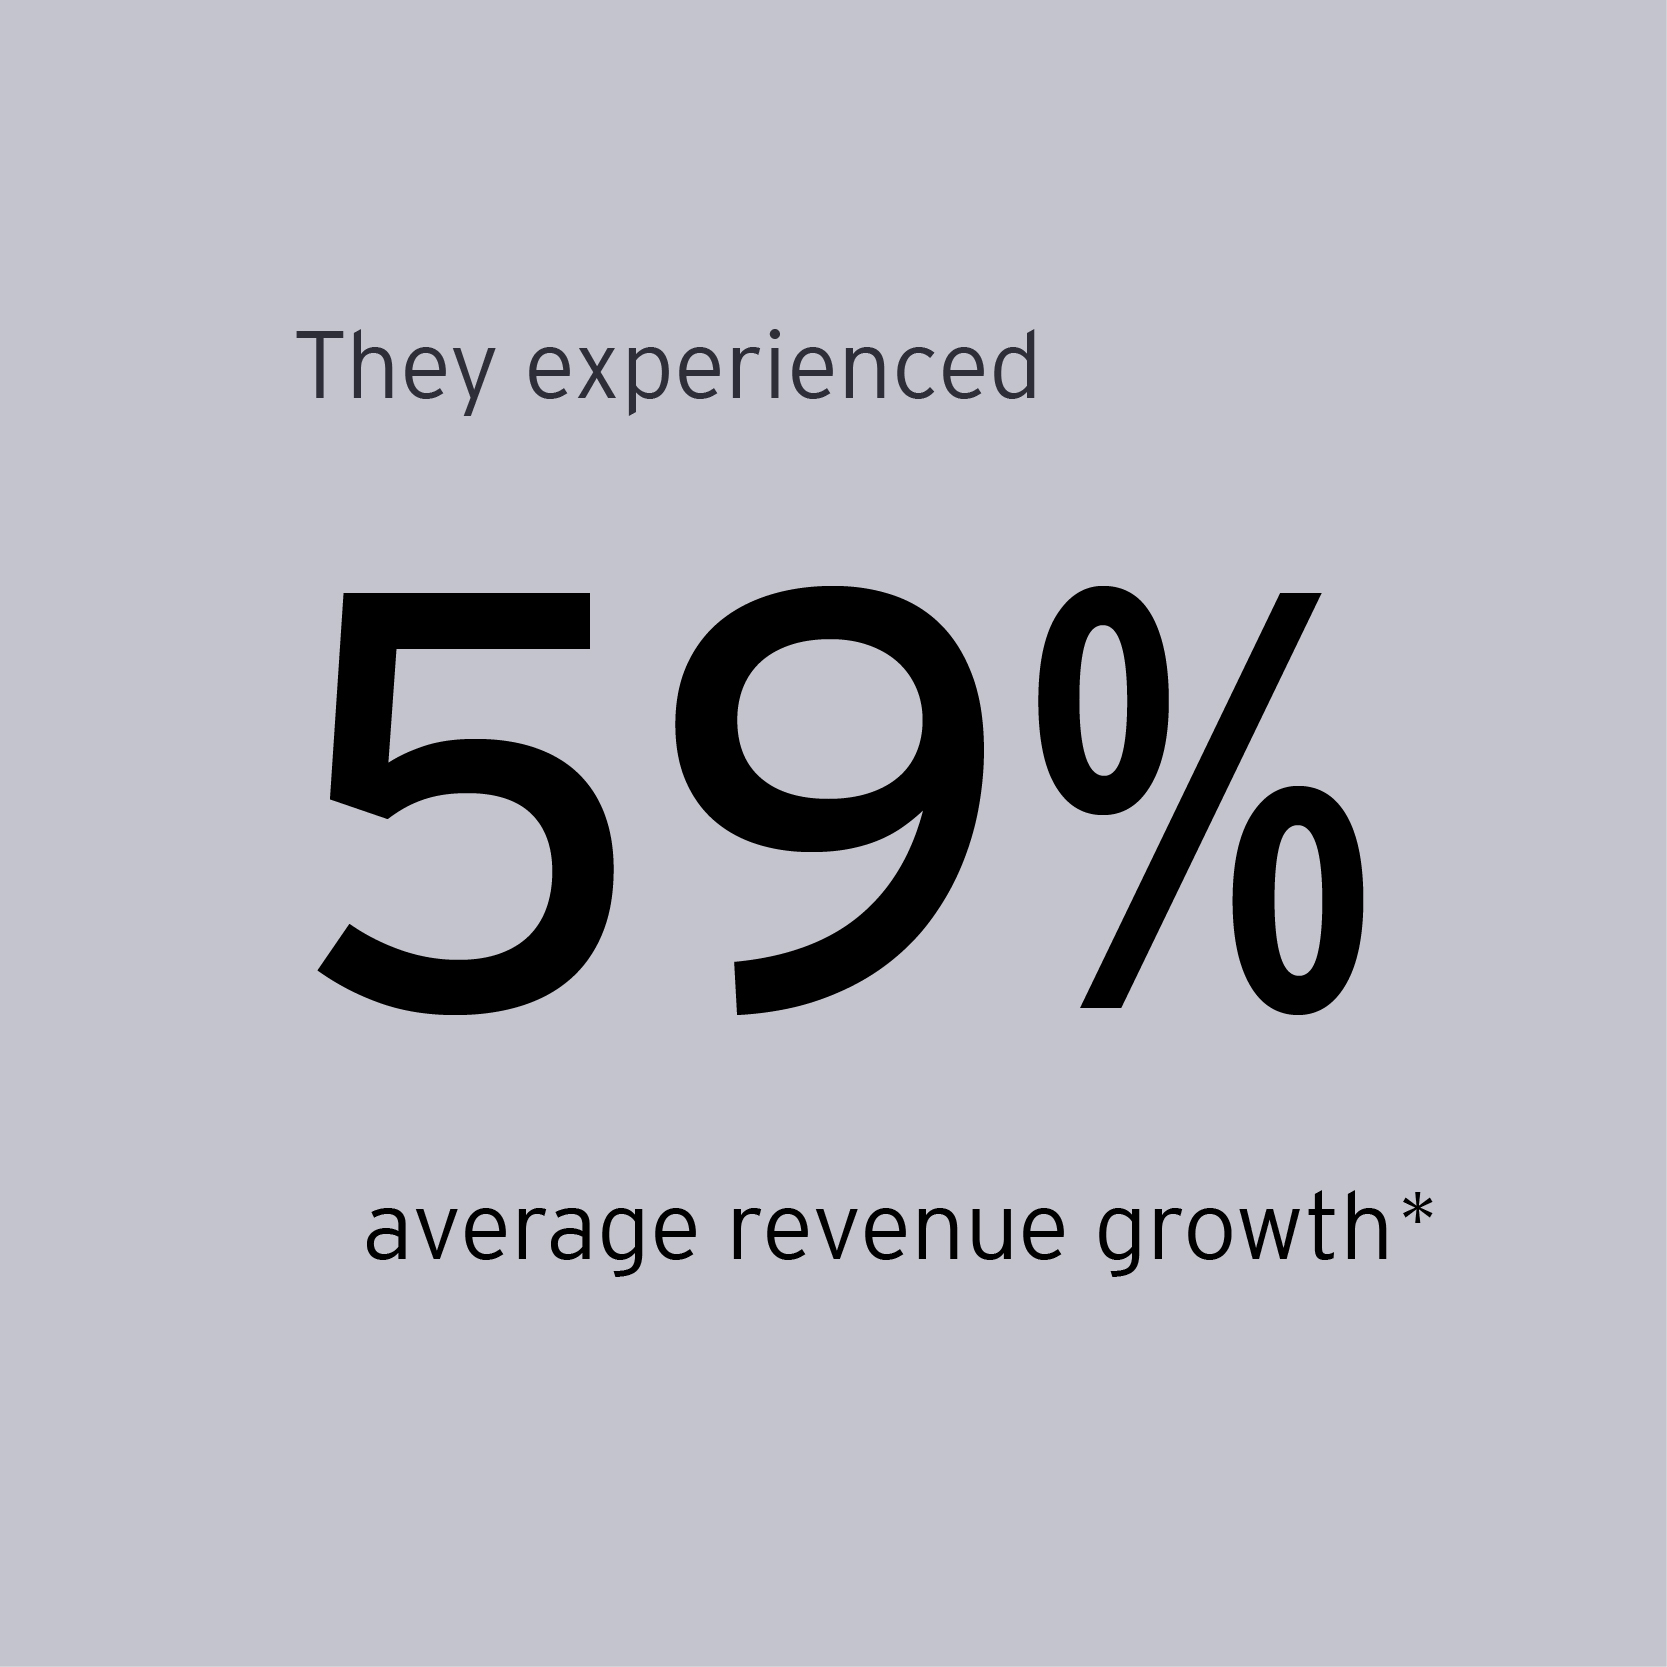 EOY CPacific Southwest finalists experienced 59% average revenue growth